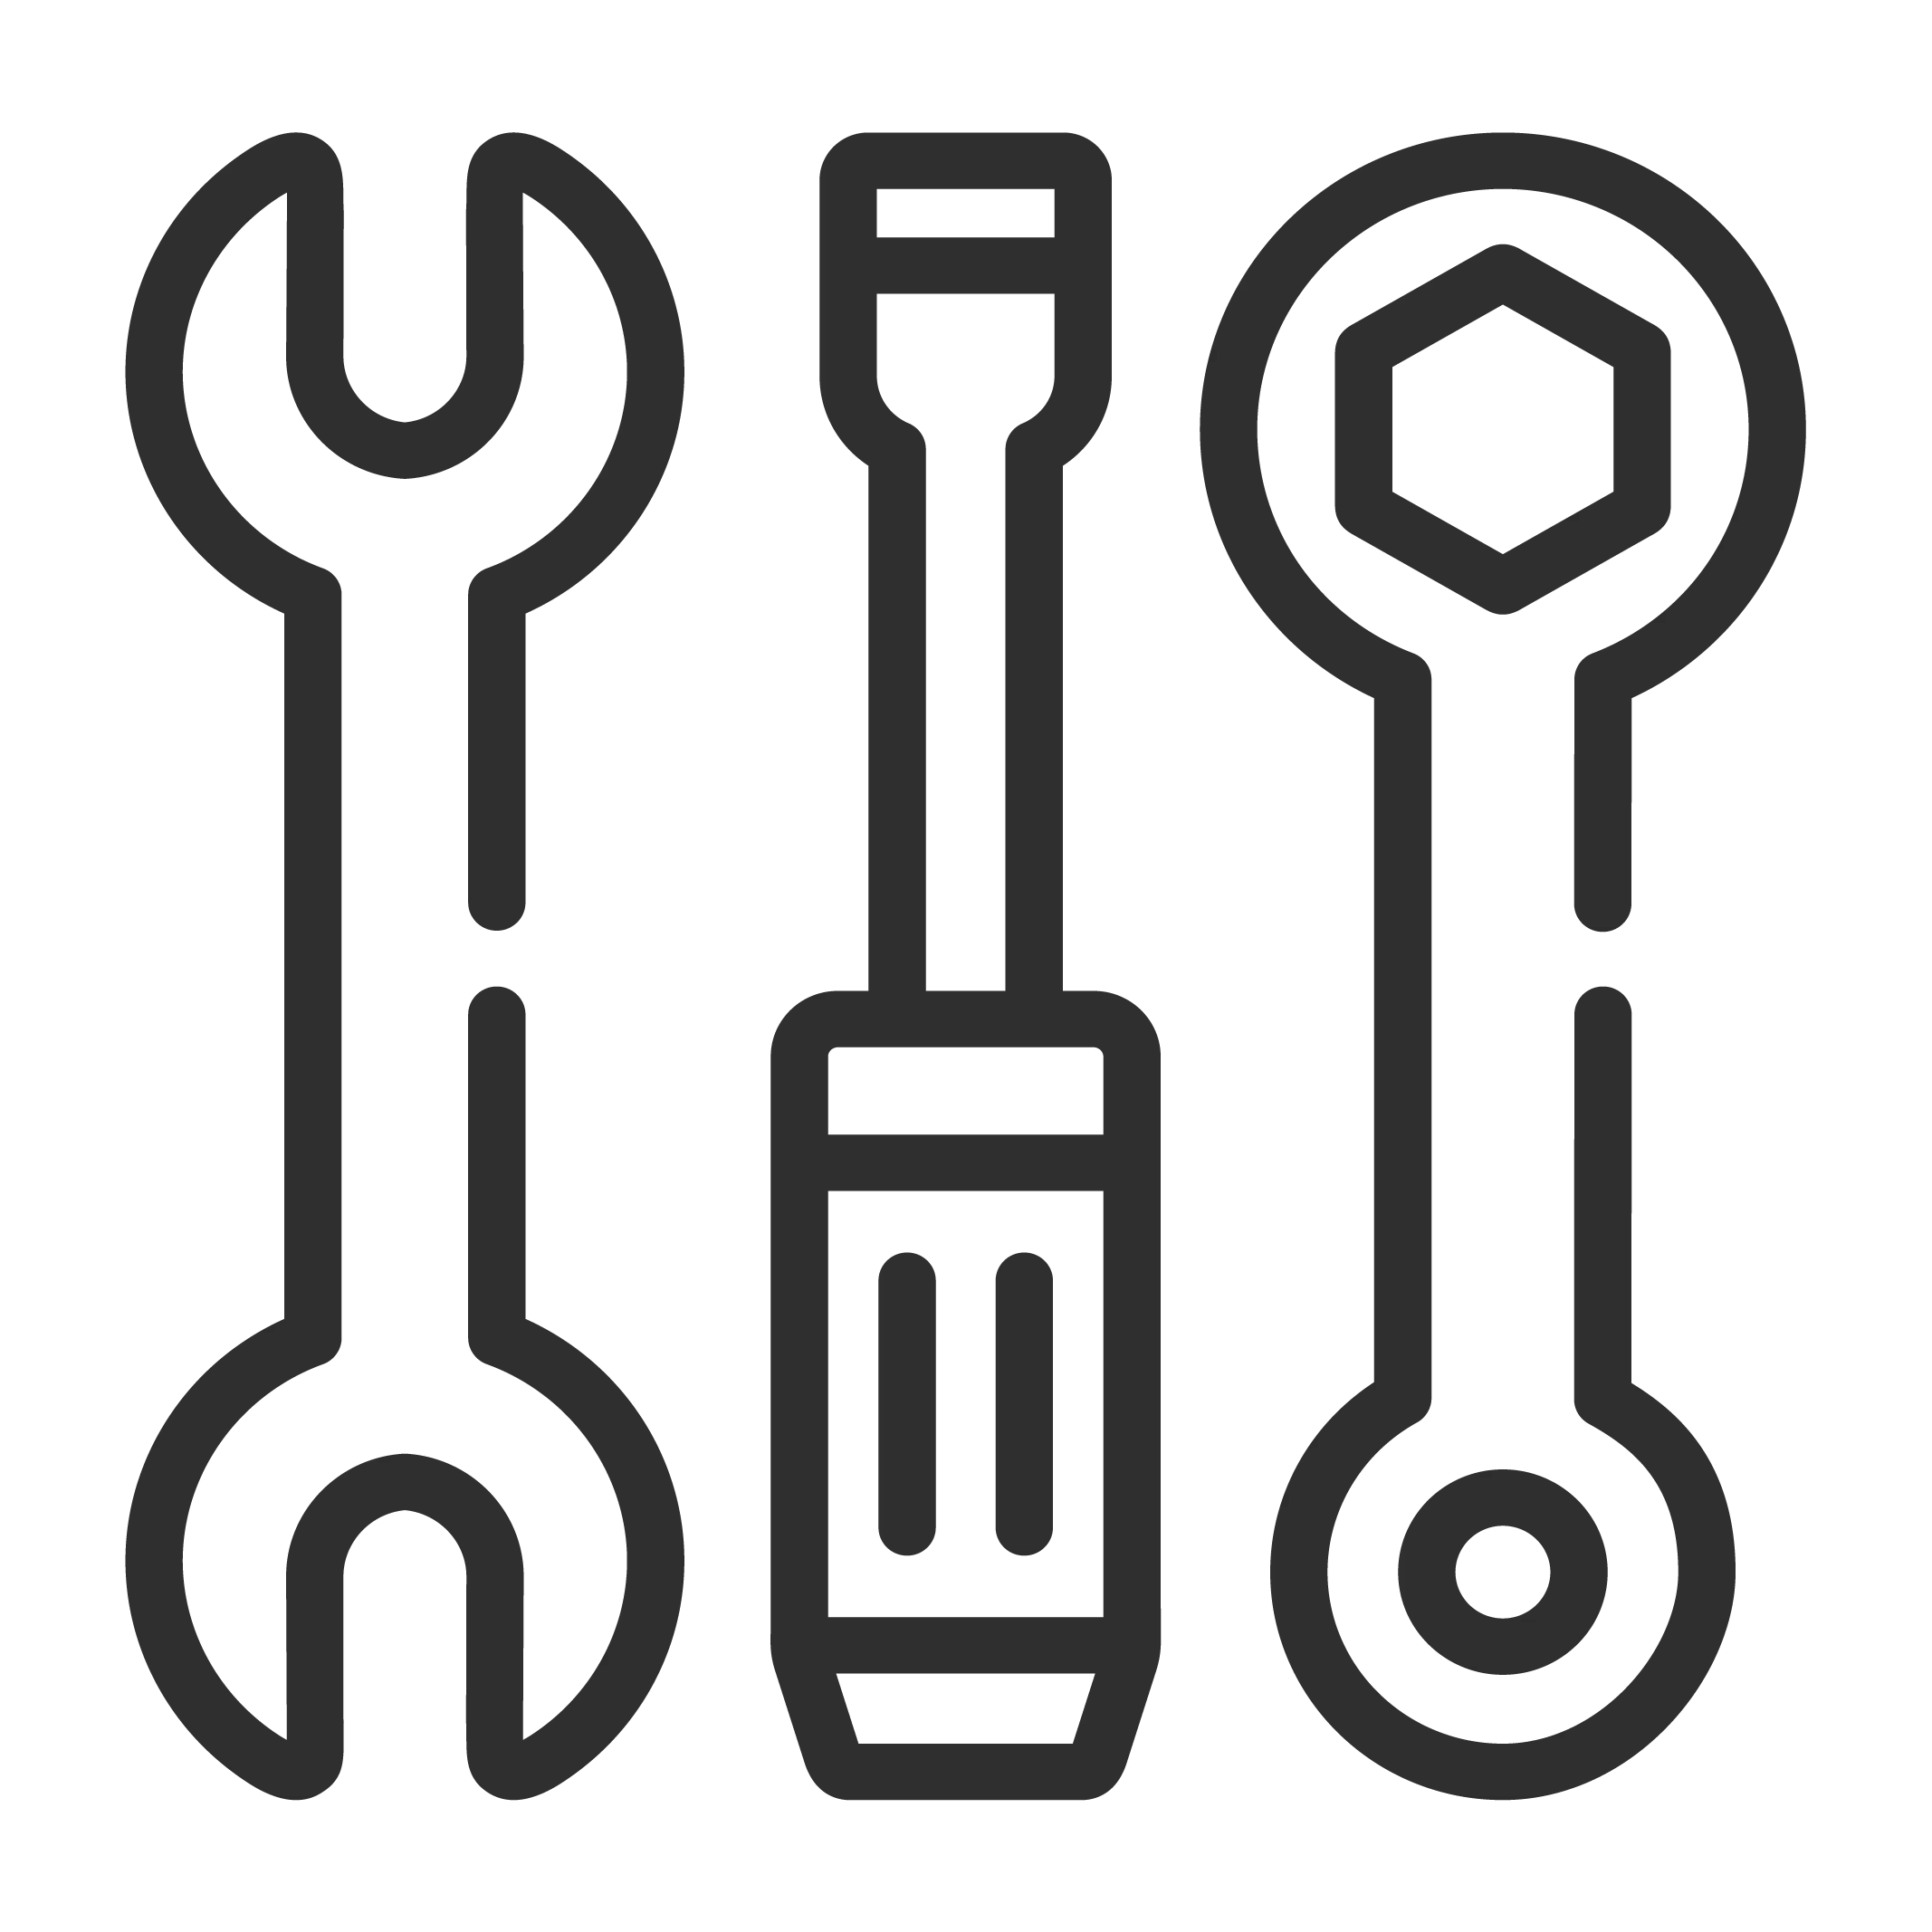 Icon of spanner, screwdriver and wrench